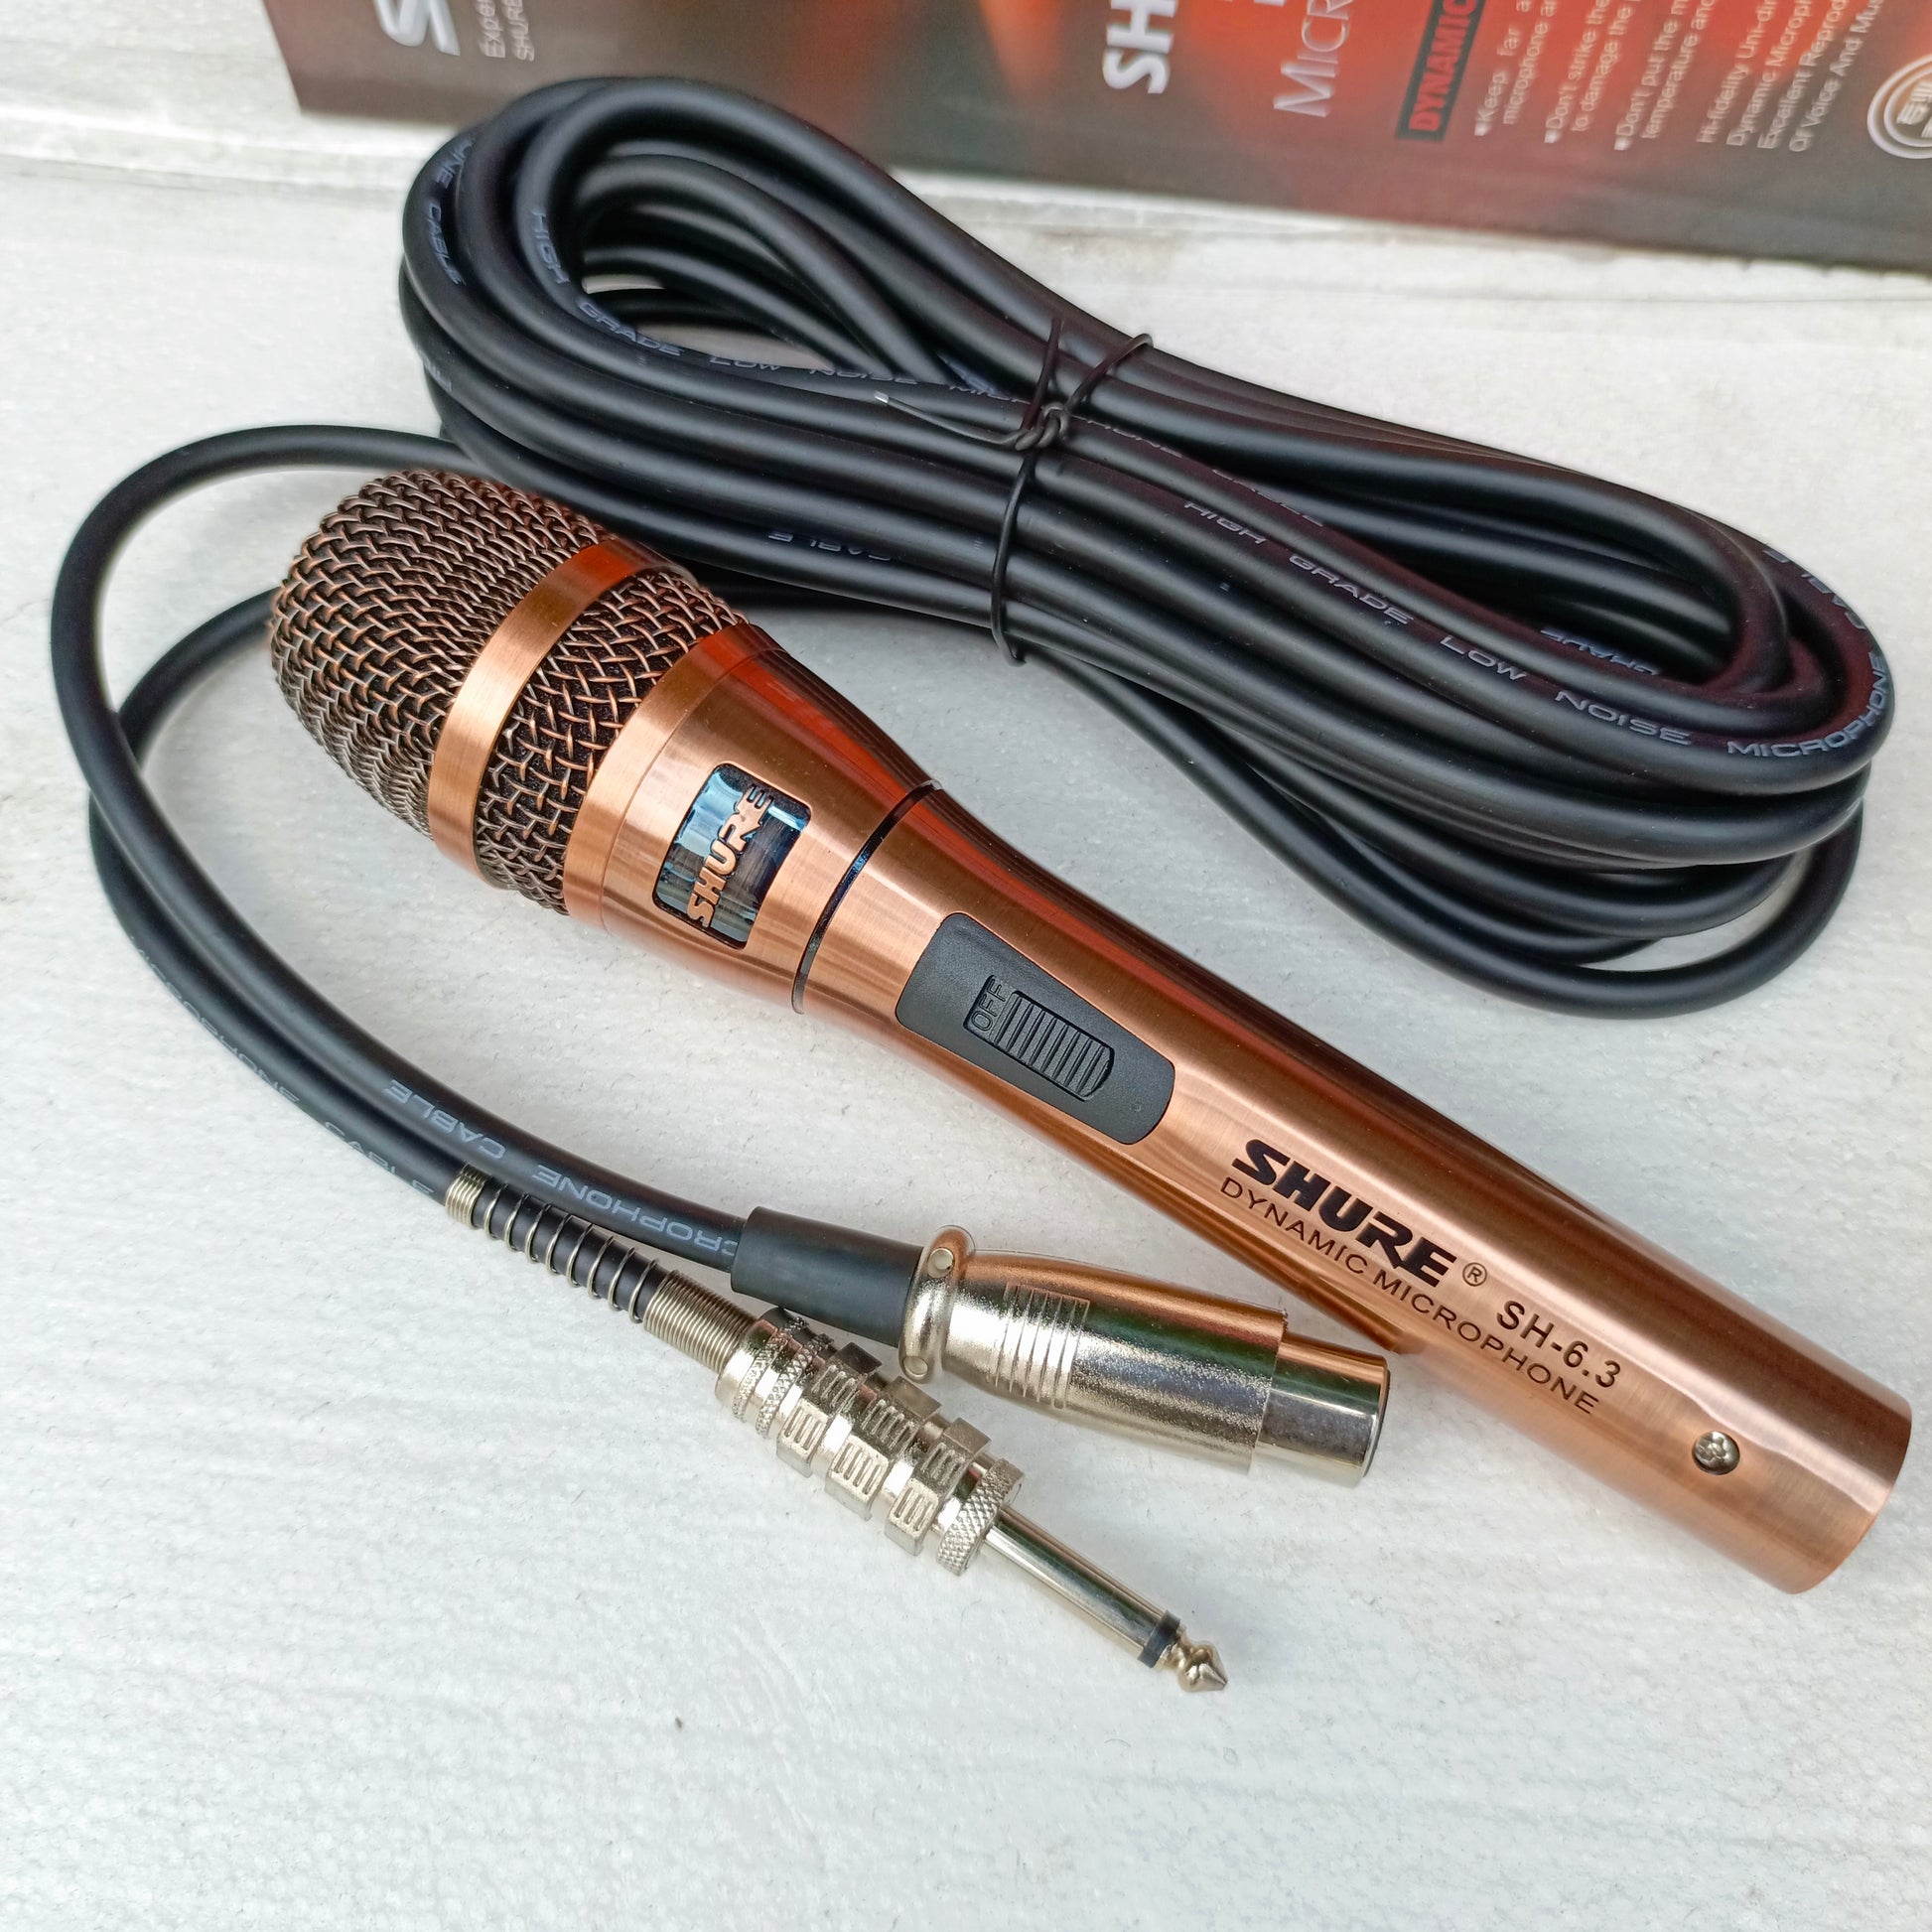 SHURE SH-6.3 Cardioid Dynamic Vocal Microphone - Brand New